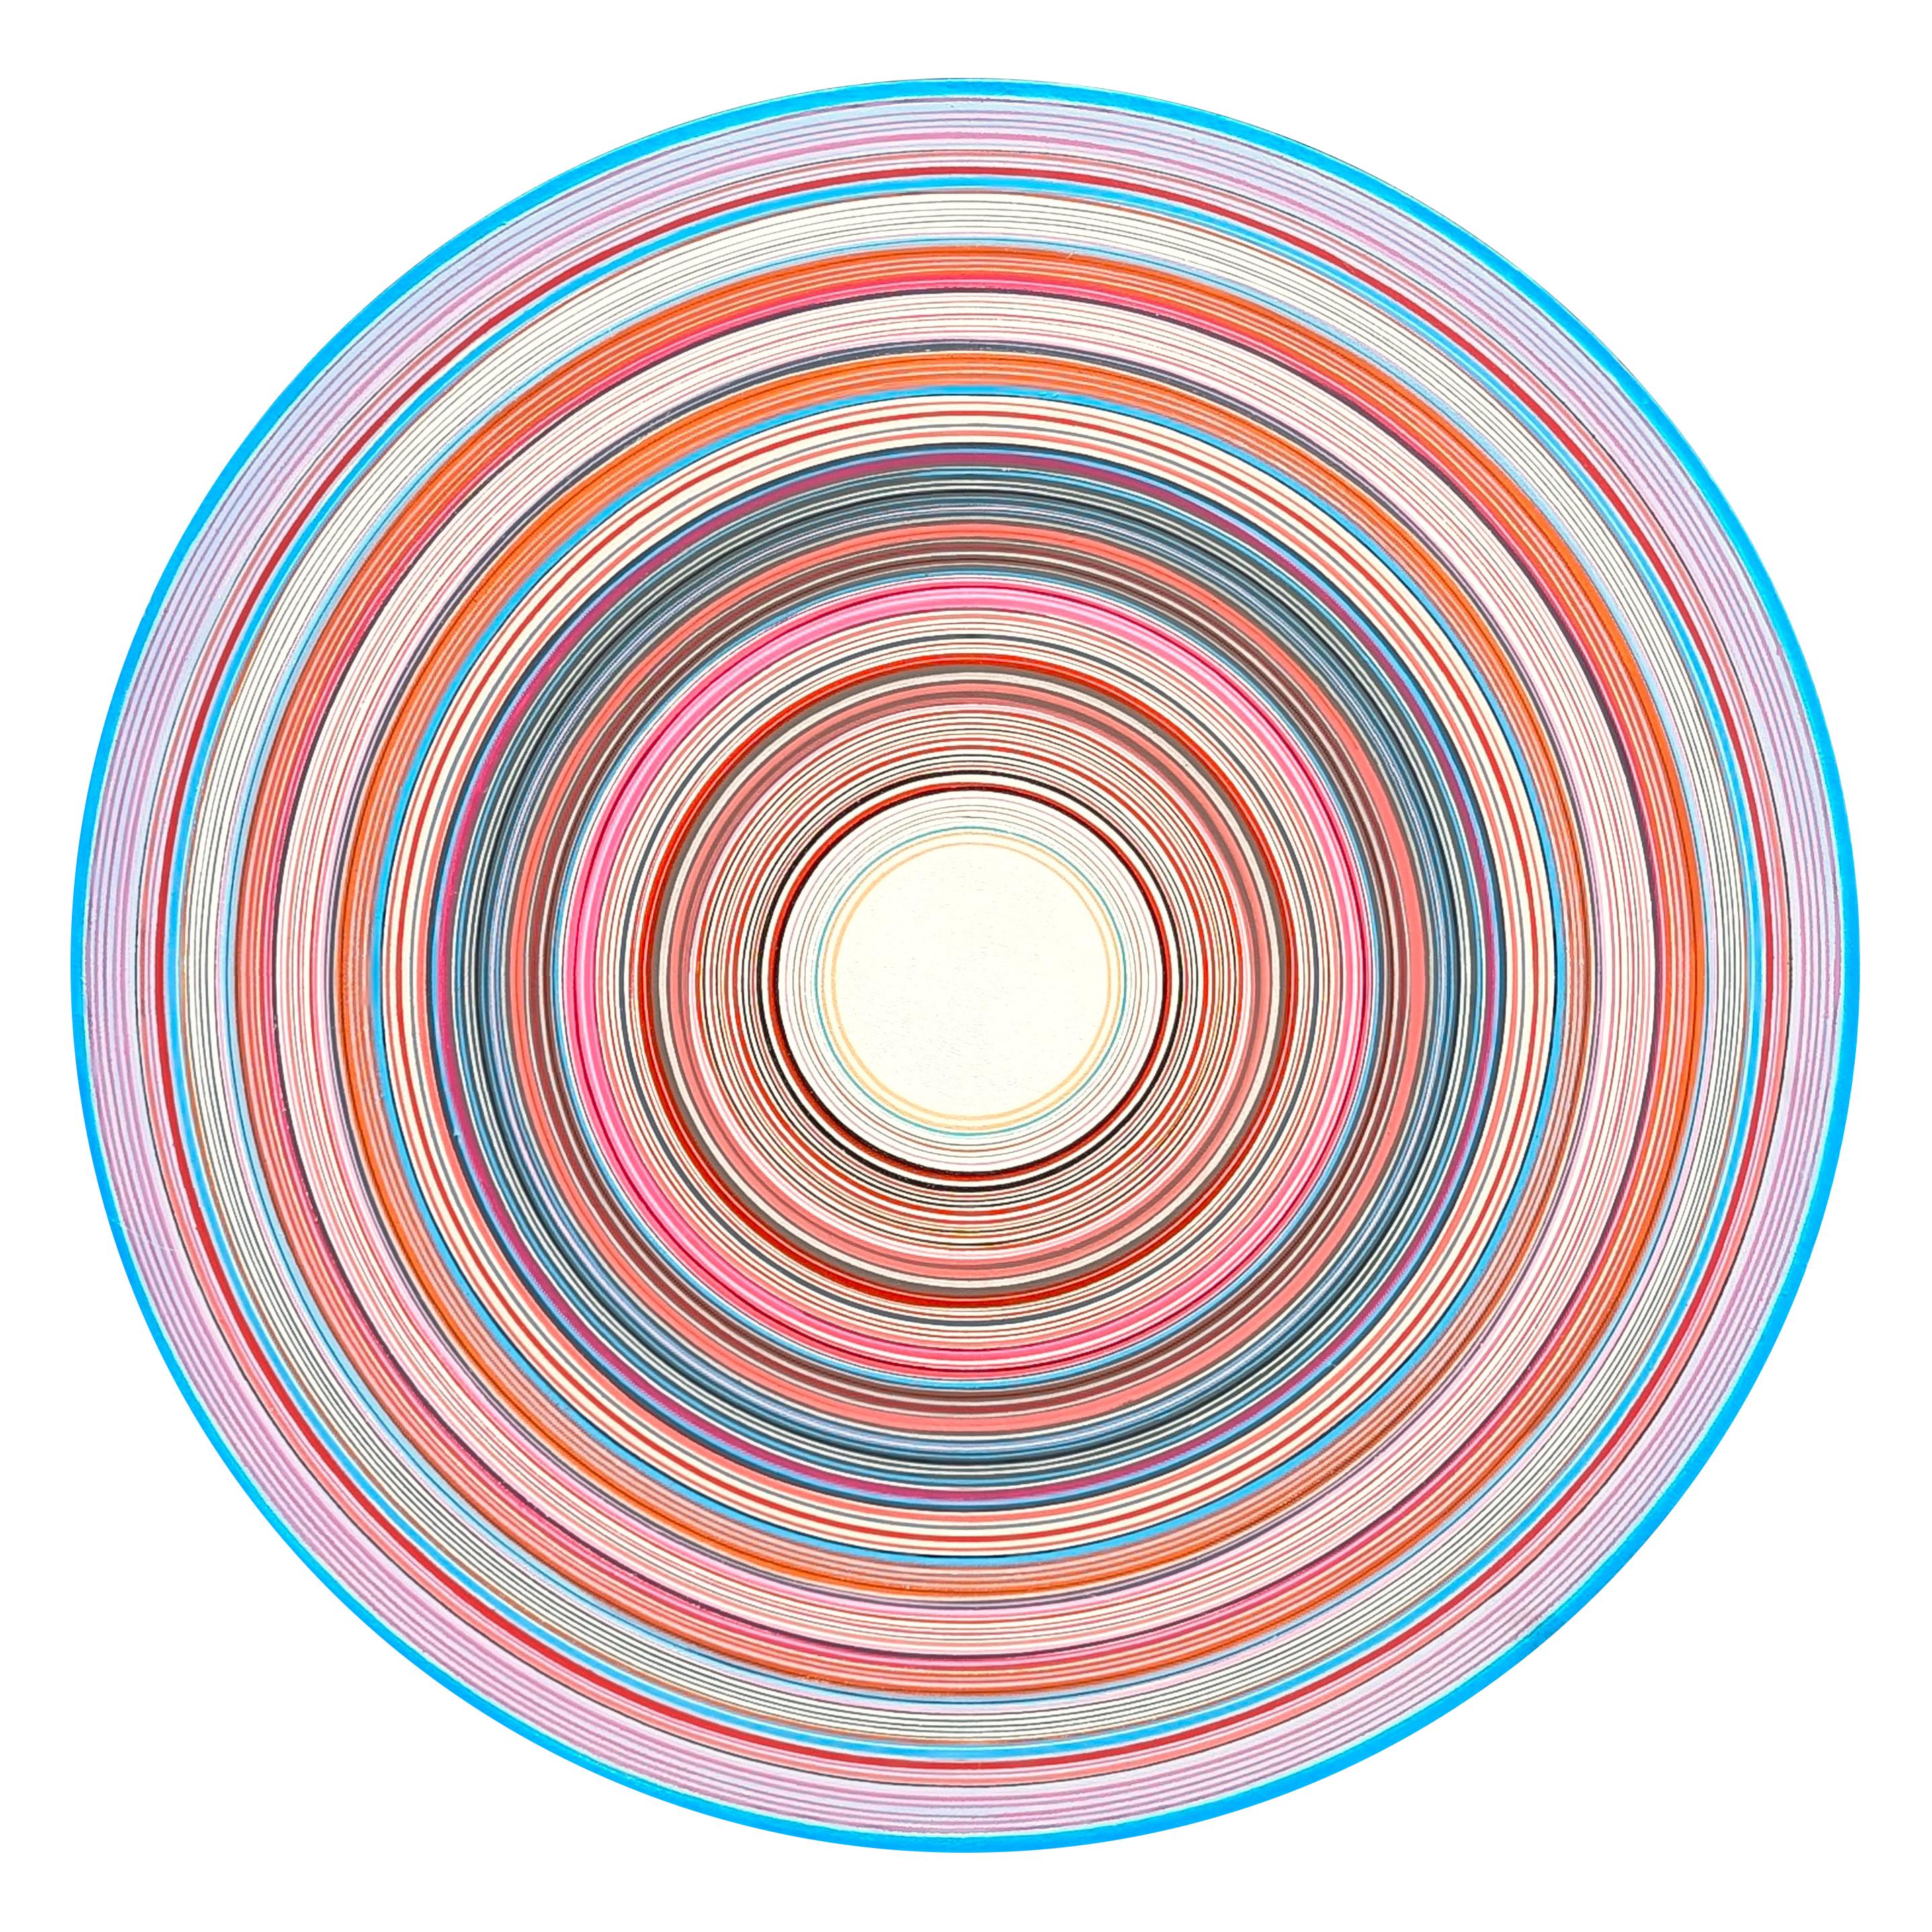 David Hardaker Abstract Painting - "Mint Royale" Contemporary Abstract Pink & Blue Concentric Circle Painting